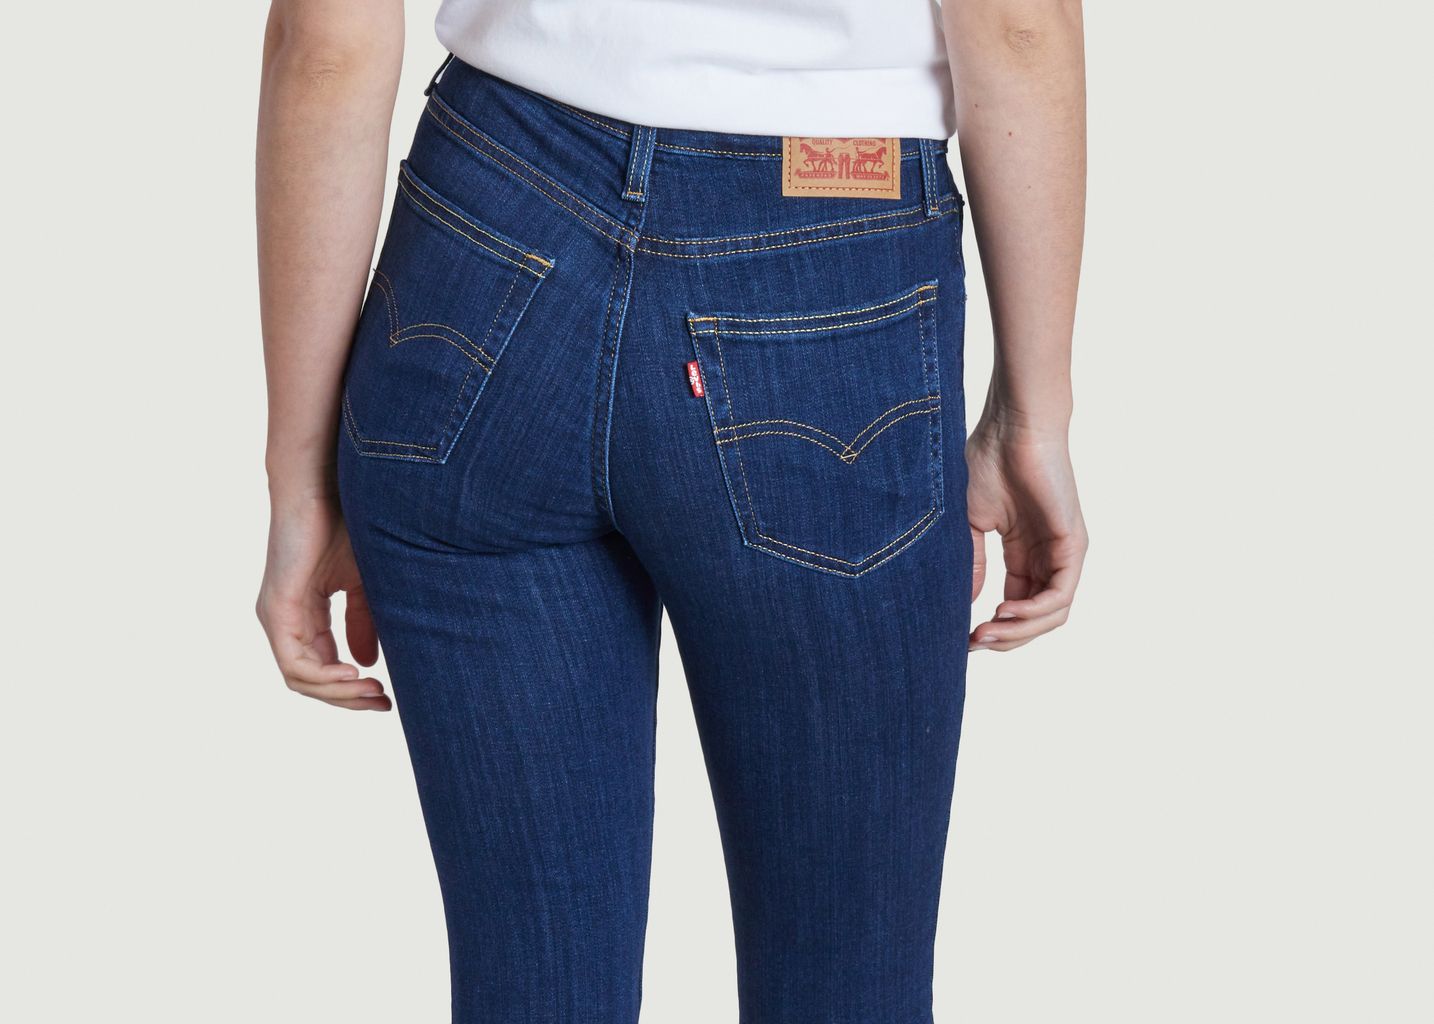 Levis 721 Skinny Chelsea Eve Jeans  - Levi's Red Tab